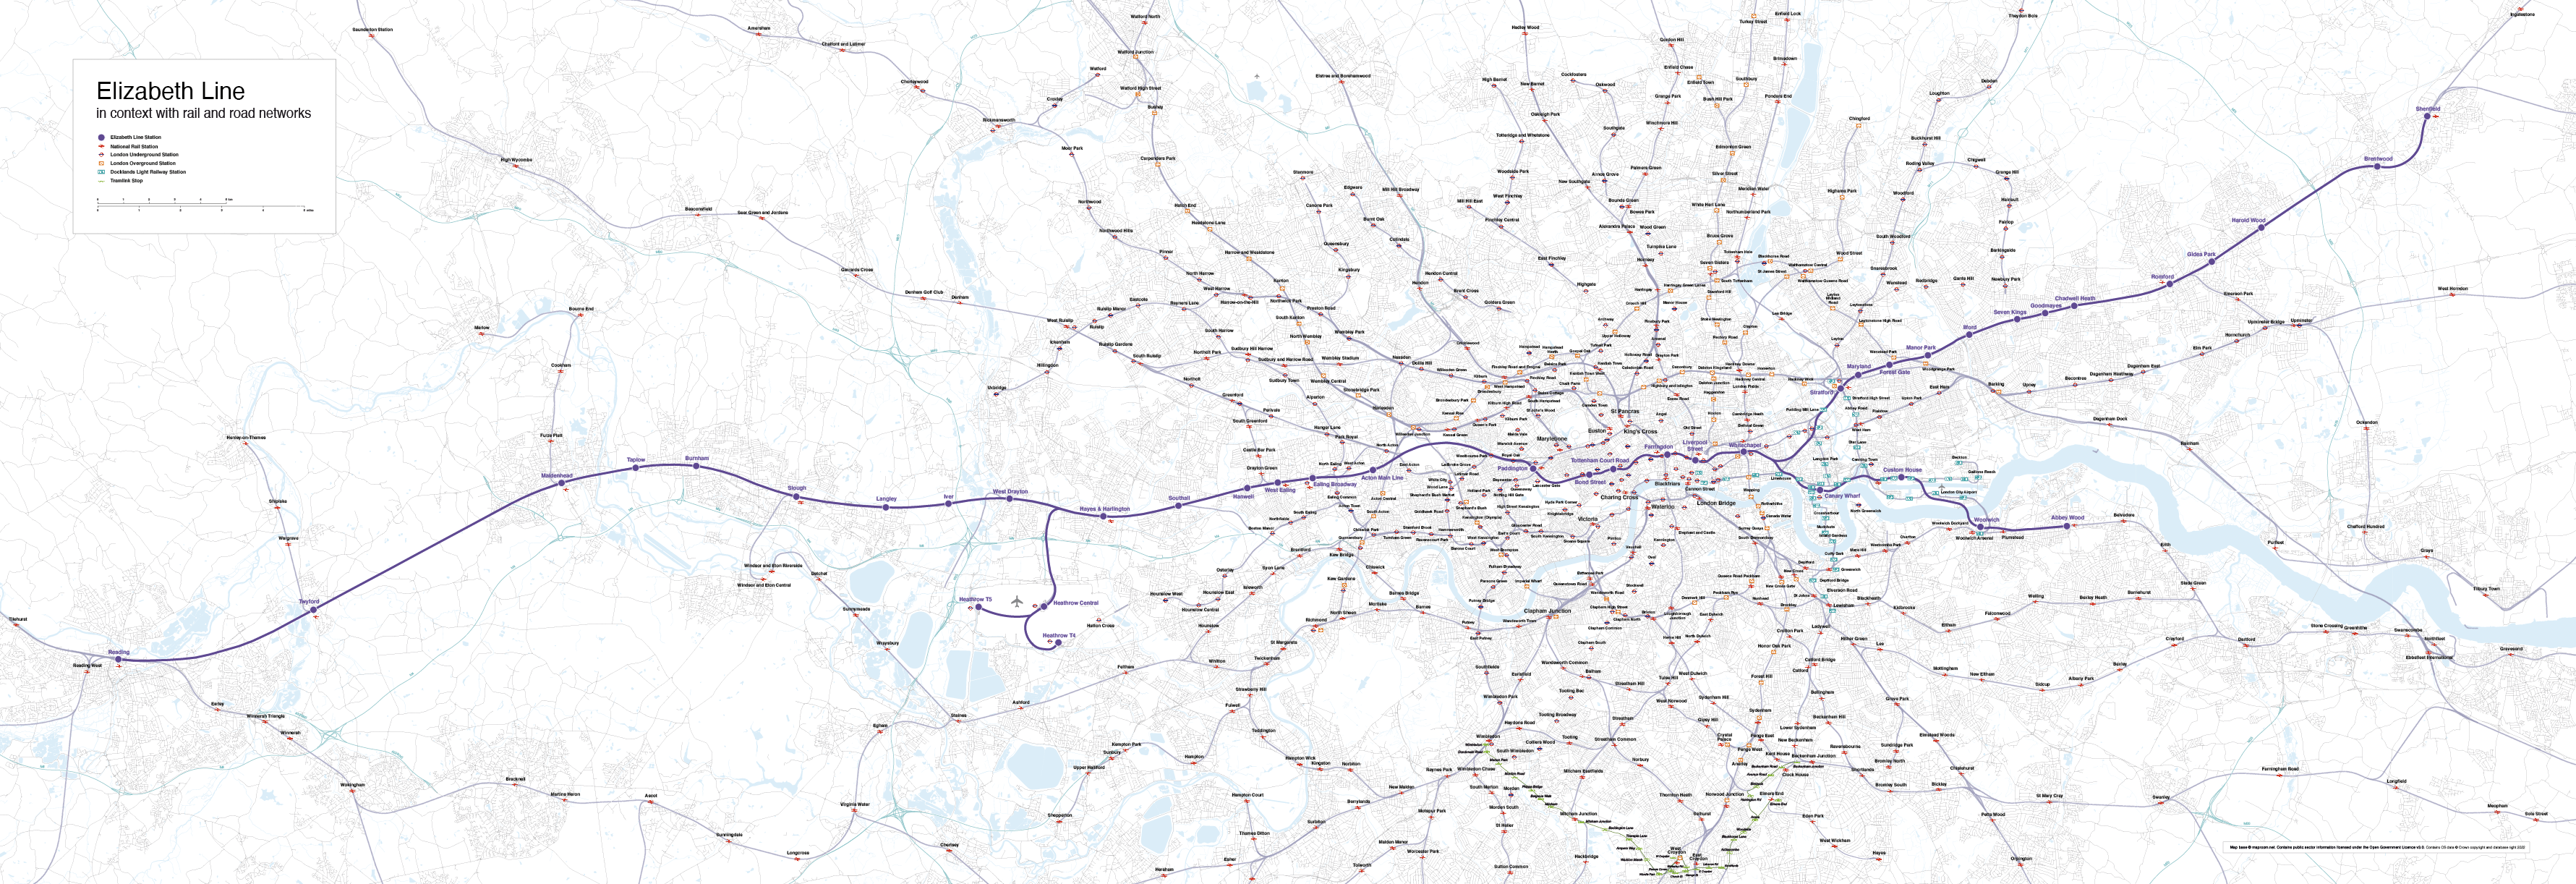 Elizabeth Line map with rail and road networks low-resolution preview